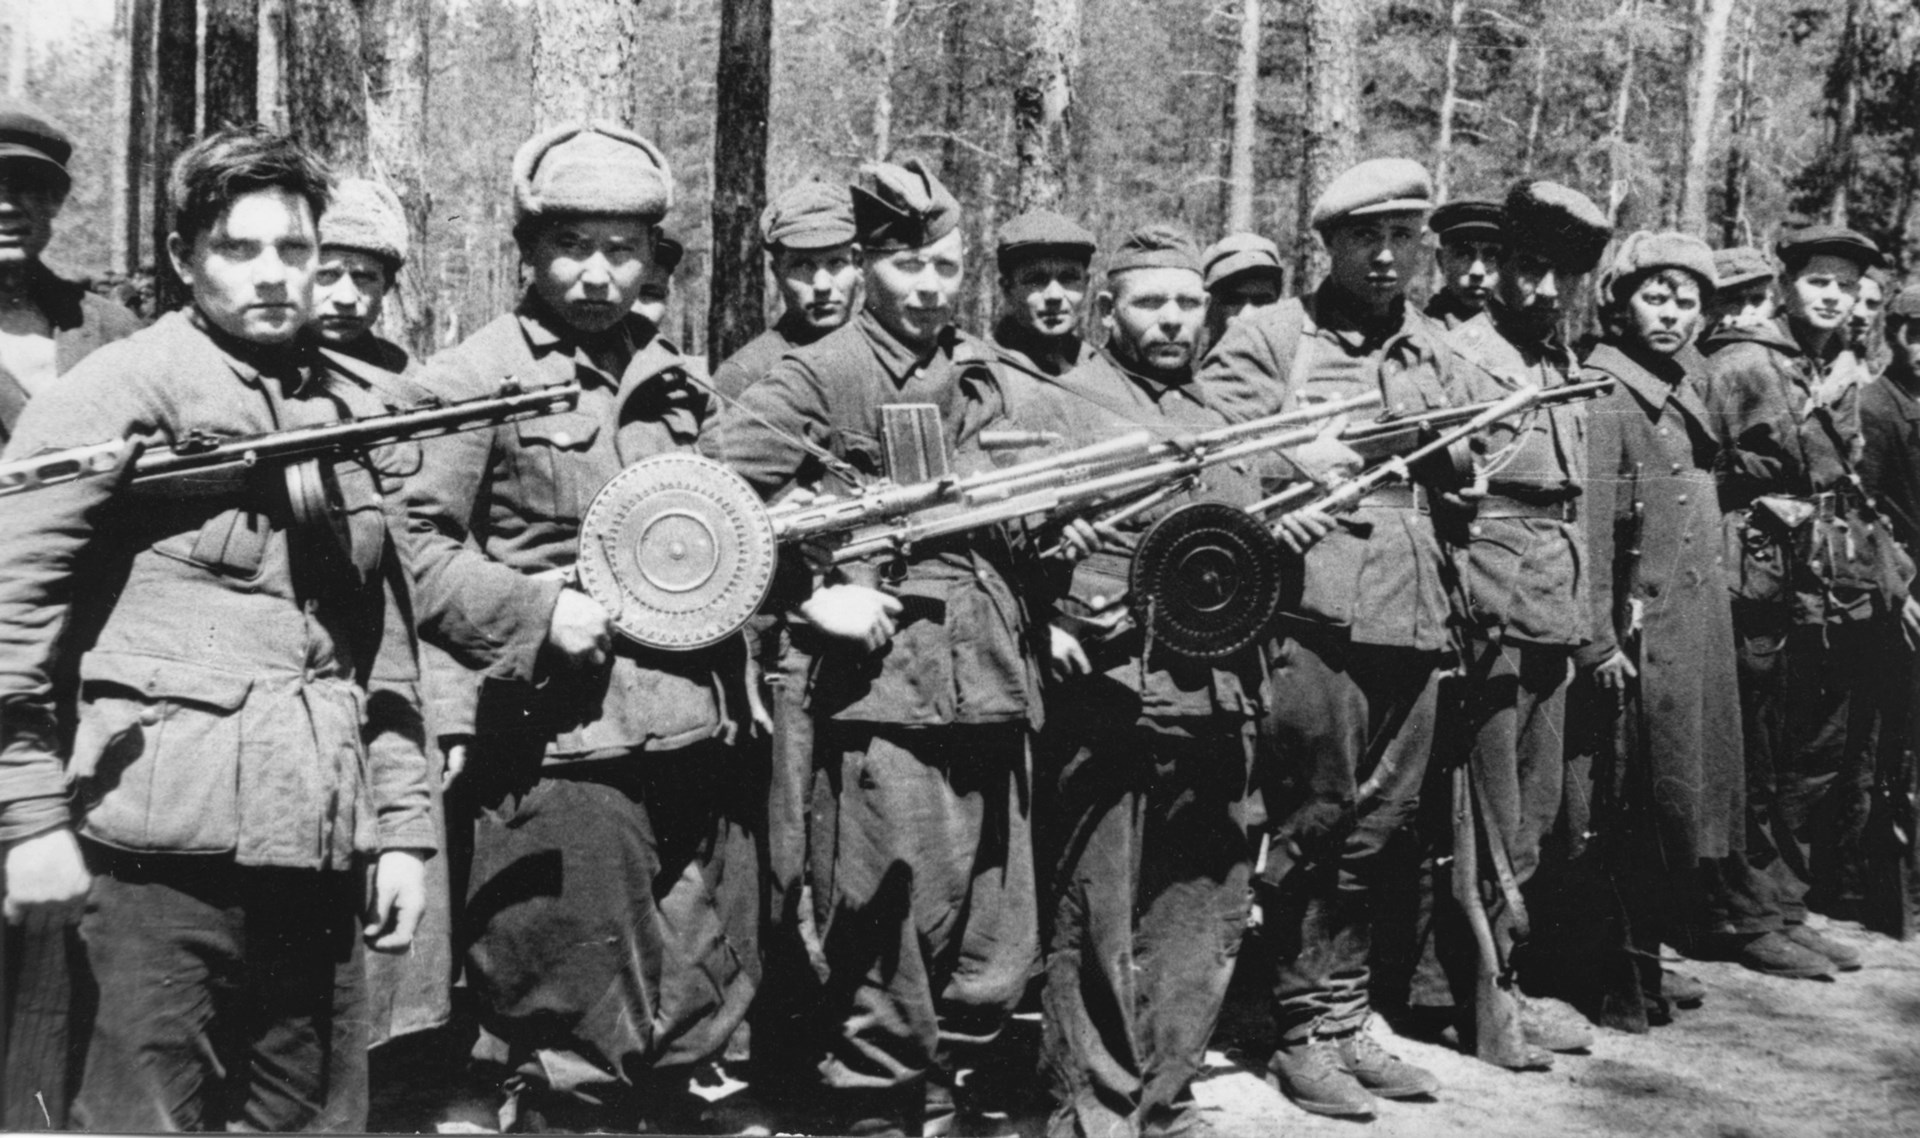 There's plenty of firepower in this guerrilla band, with DP-27 and ZB26 LMGs to support the rifles and SMGs. Author's collection